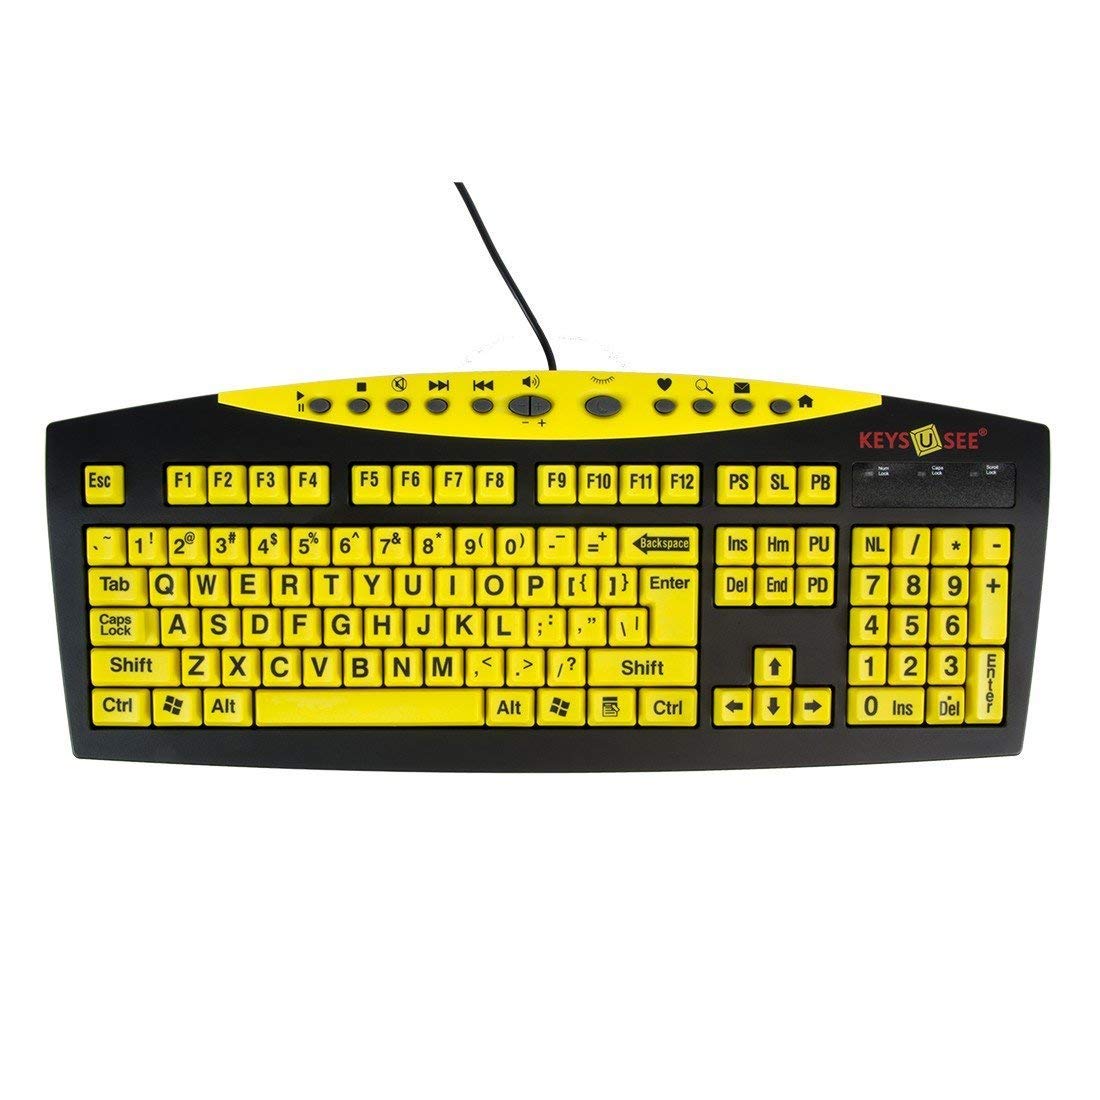 Keys-U-See Large Print USB Wired Computer Keyboard (Yellow Keys with Black Letters) Great for Visually Impaired Individuals - Senior Citizens in Lo...